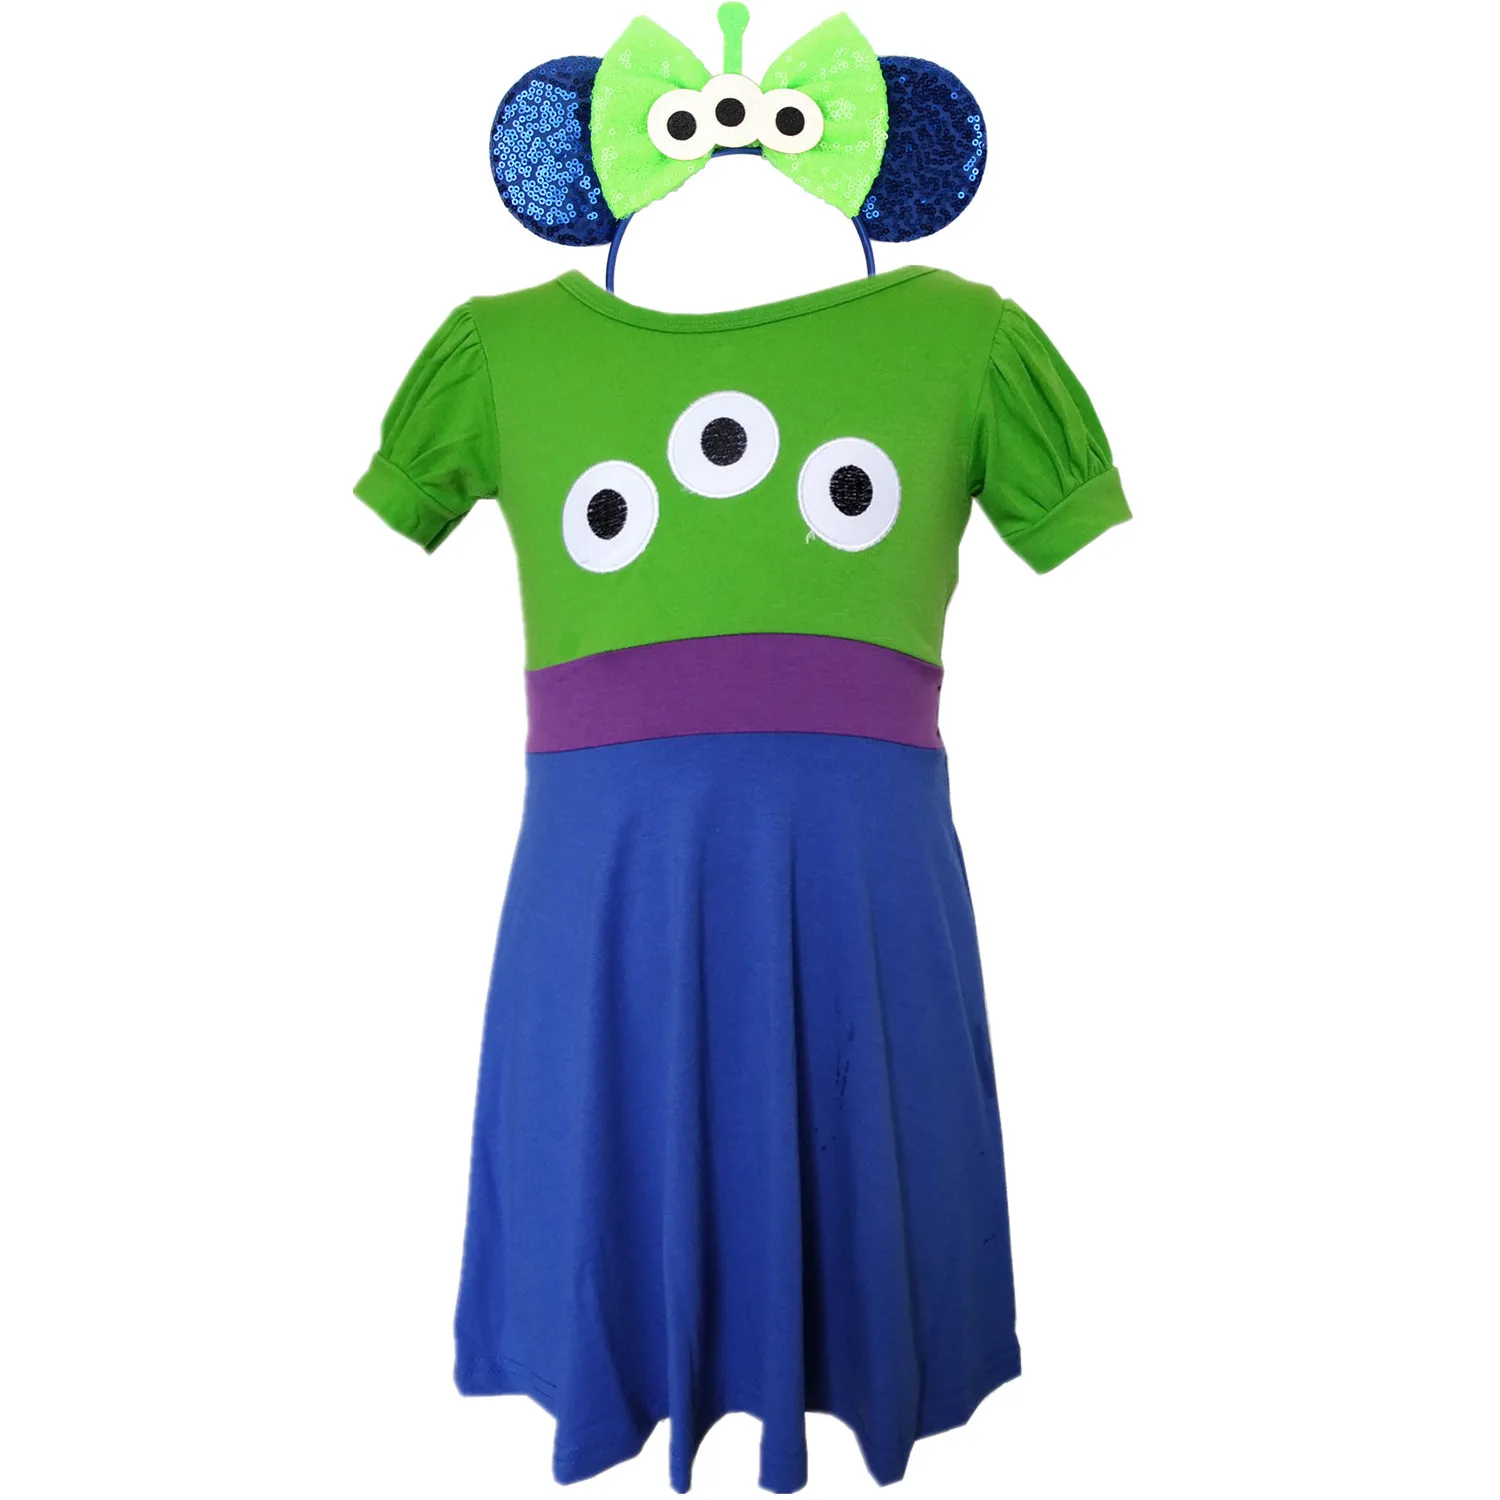 

Softest Cotton Girls Alien Dress With Ears Headband Halloween Cosply Birthday Party Daily Play Costume Dress